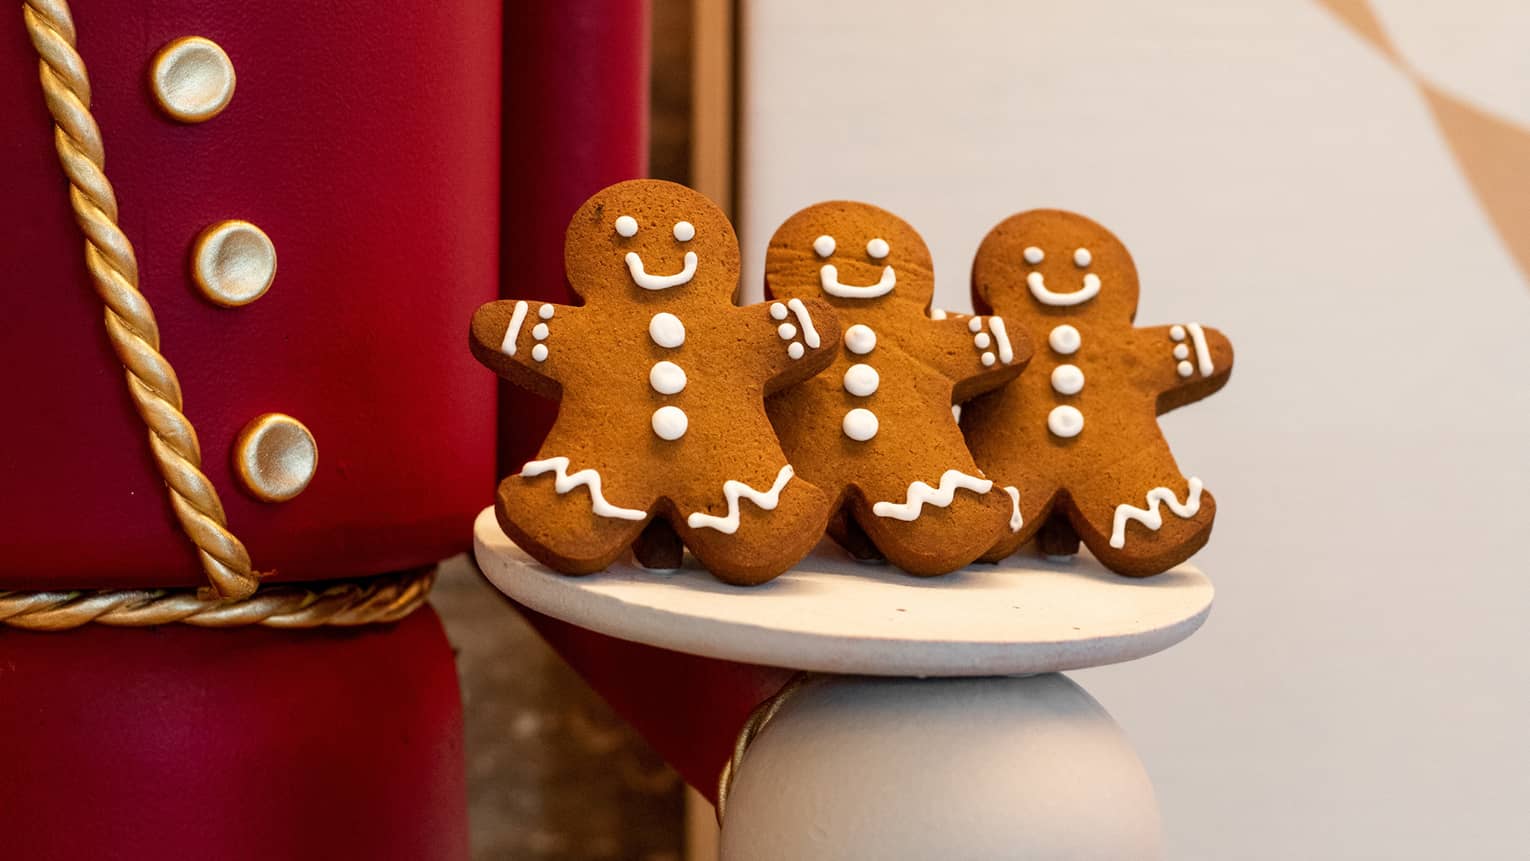 Gingerbread men cookies being held by a large nutcracker doll.